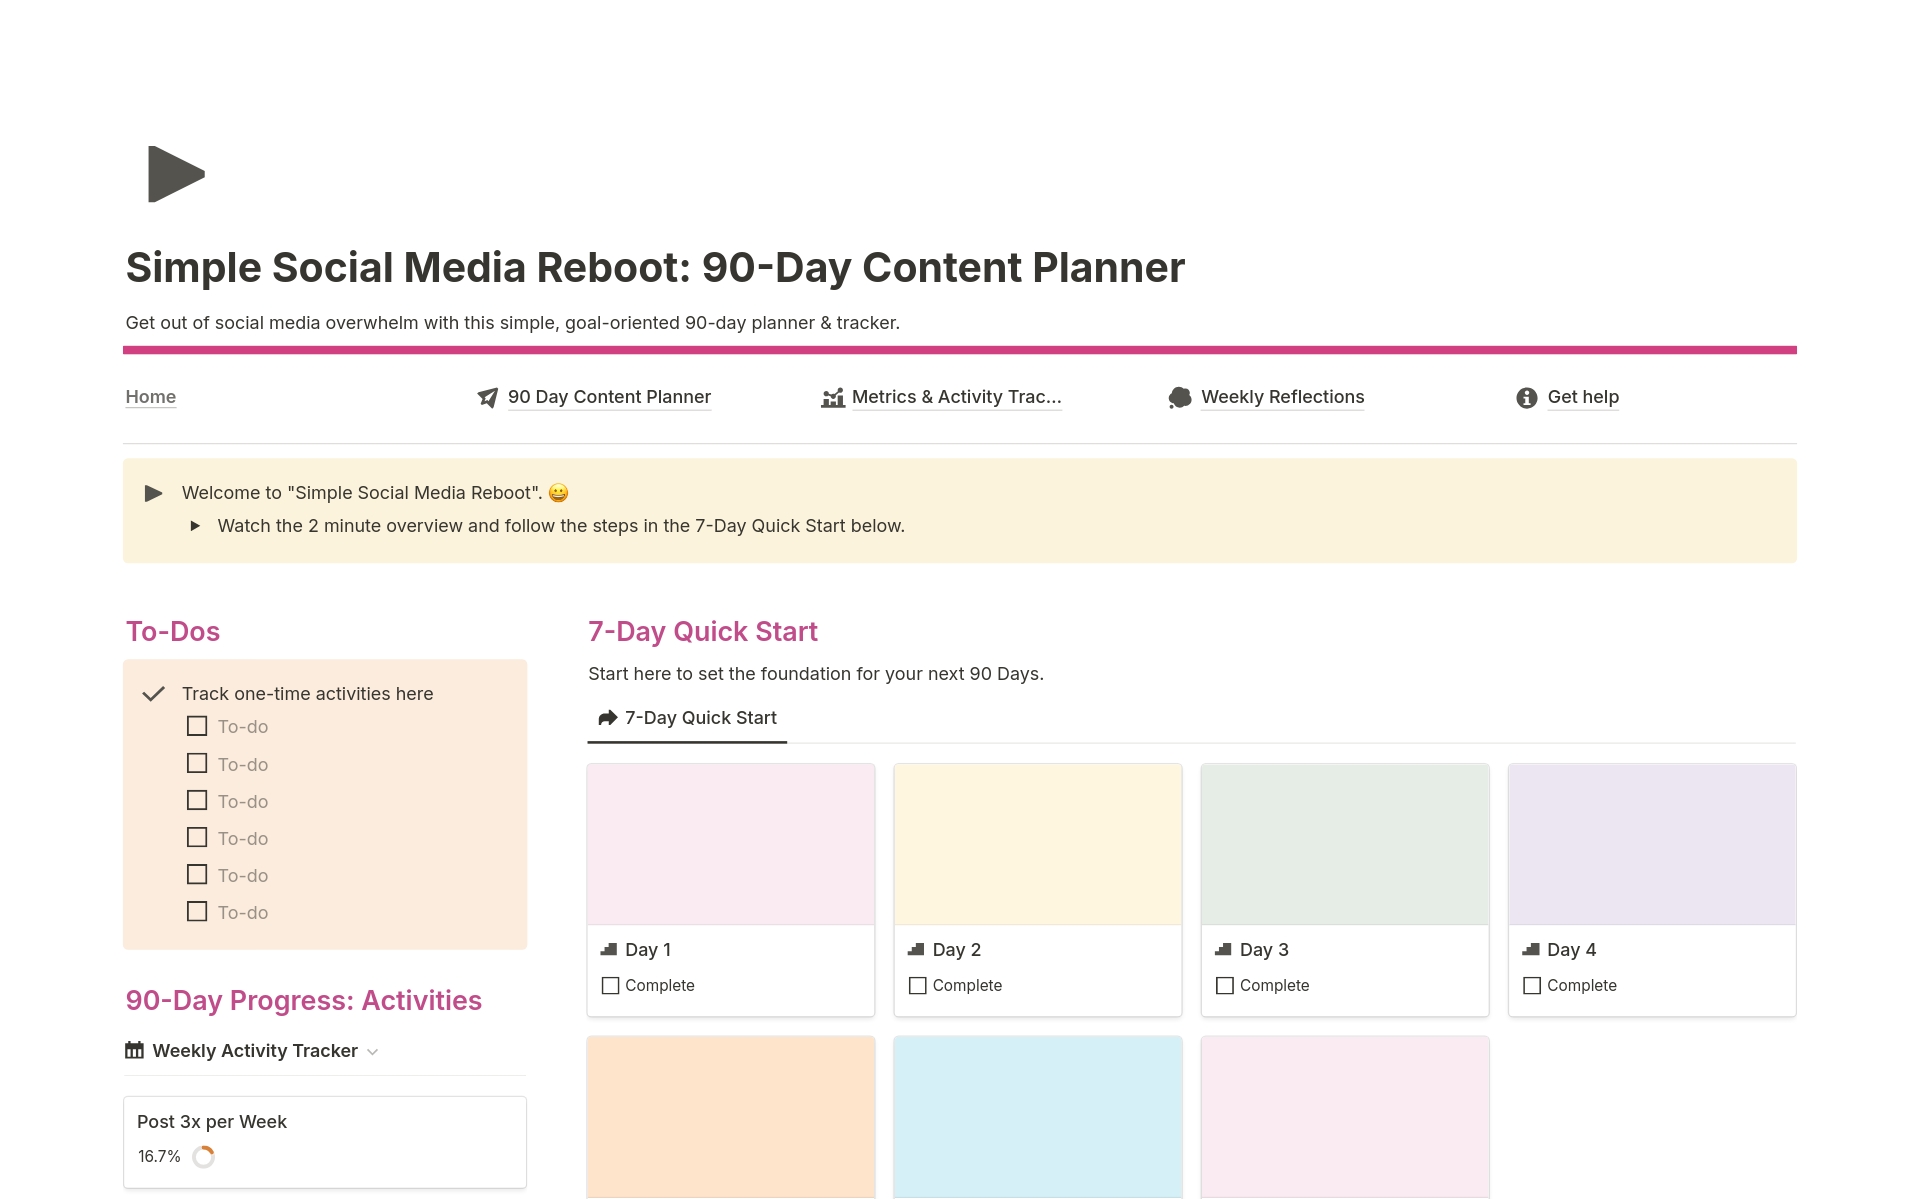 Get out of social media overwhelm with this simple, goal-oriented 90-day planner & tracker.